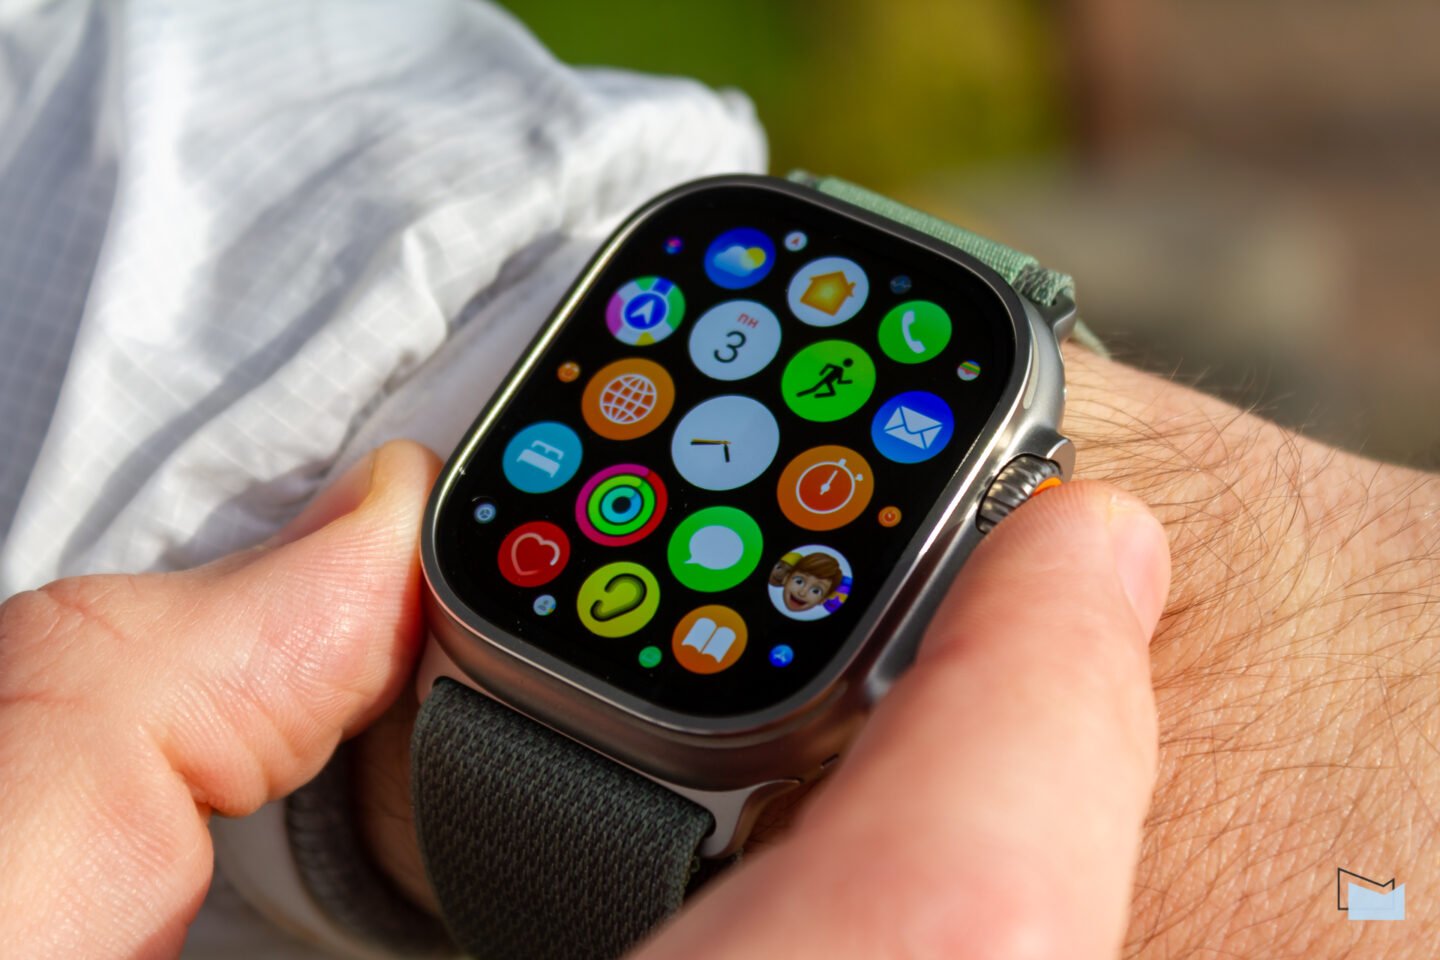 Apple Watch could have worked with Android, but the iPhone got in the way